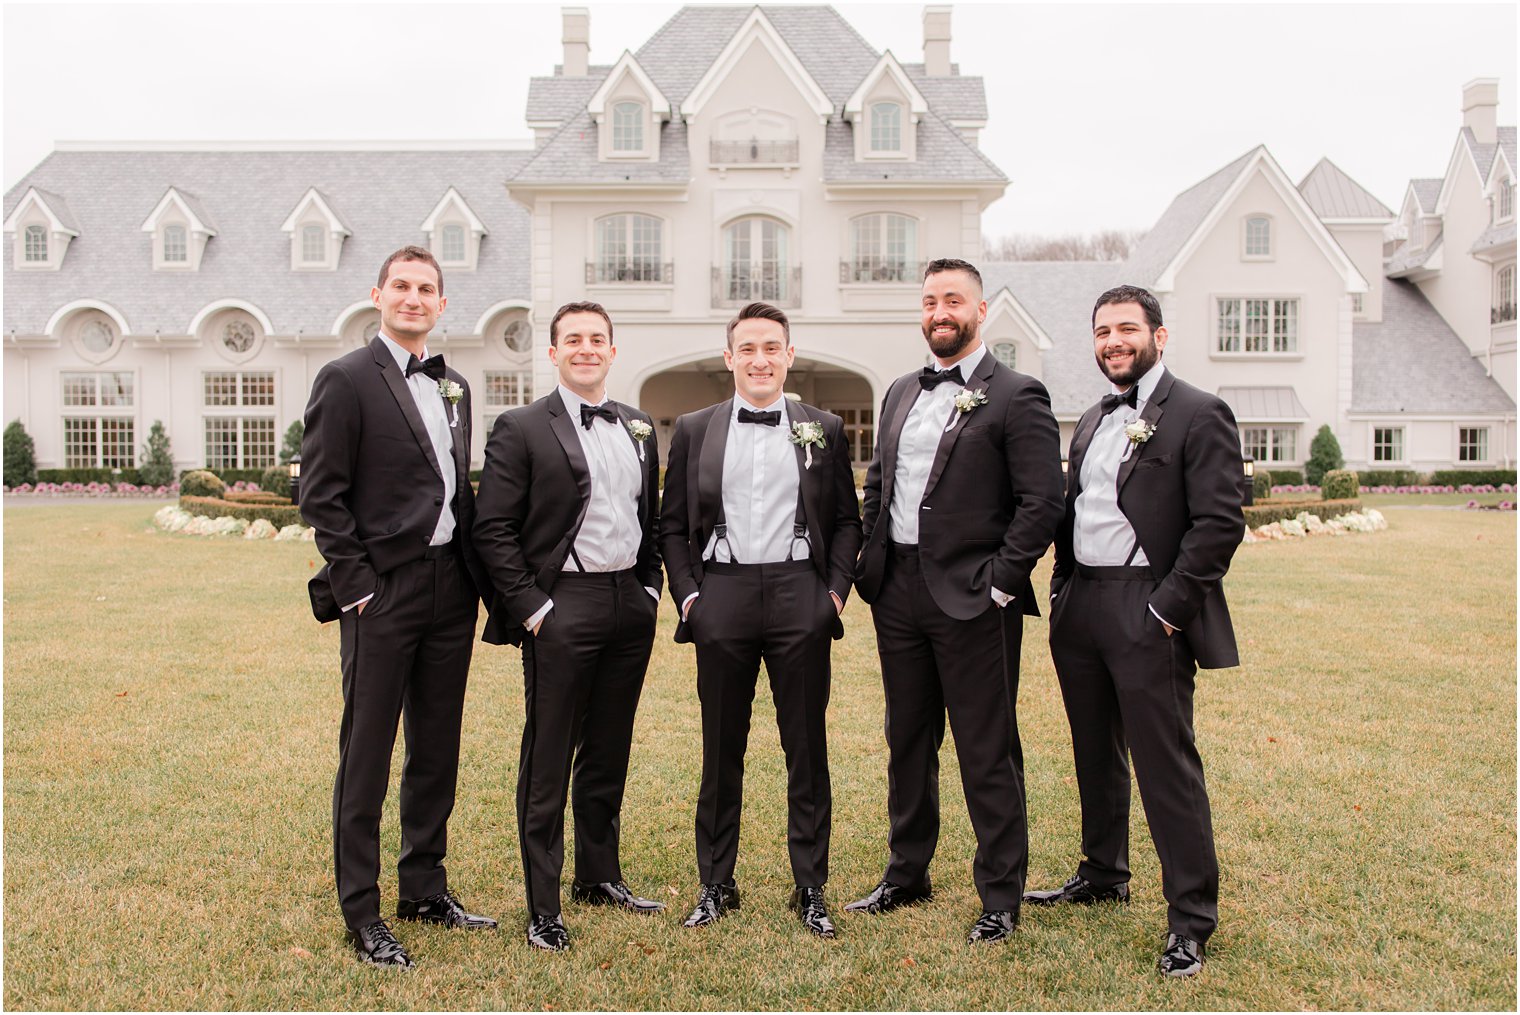 Groom and groomsmen at Park Chateau Estate in East Brunswick, NJ